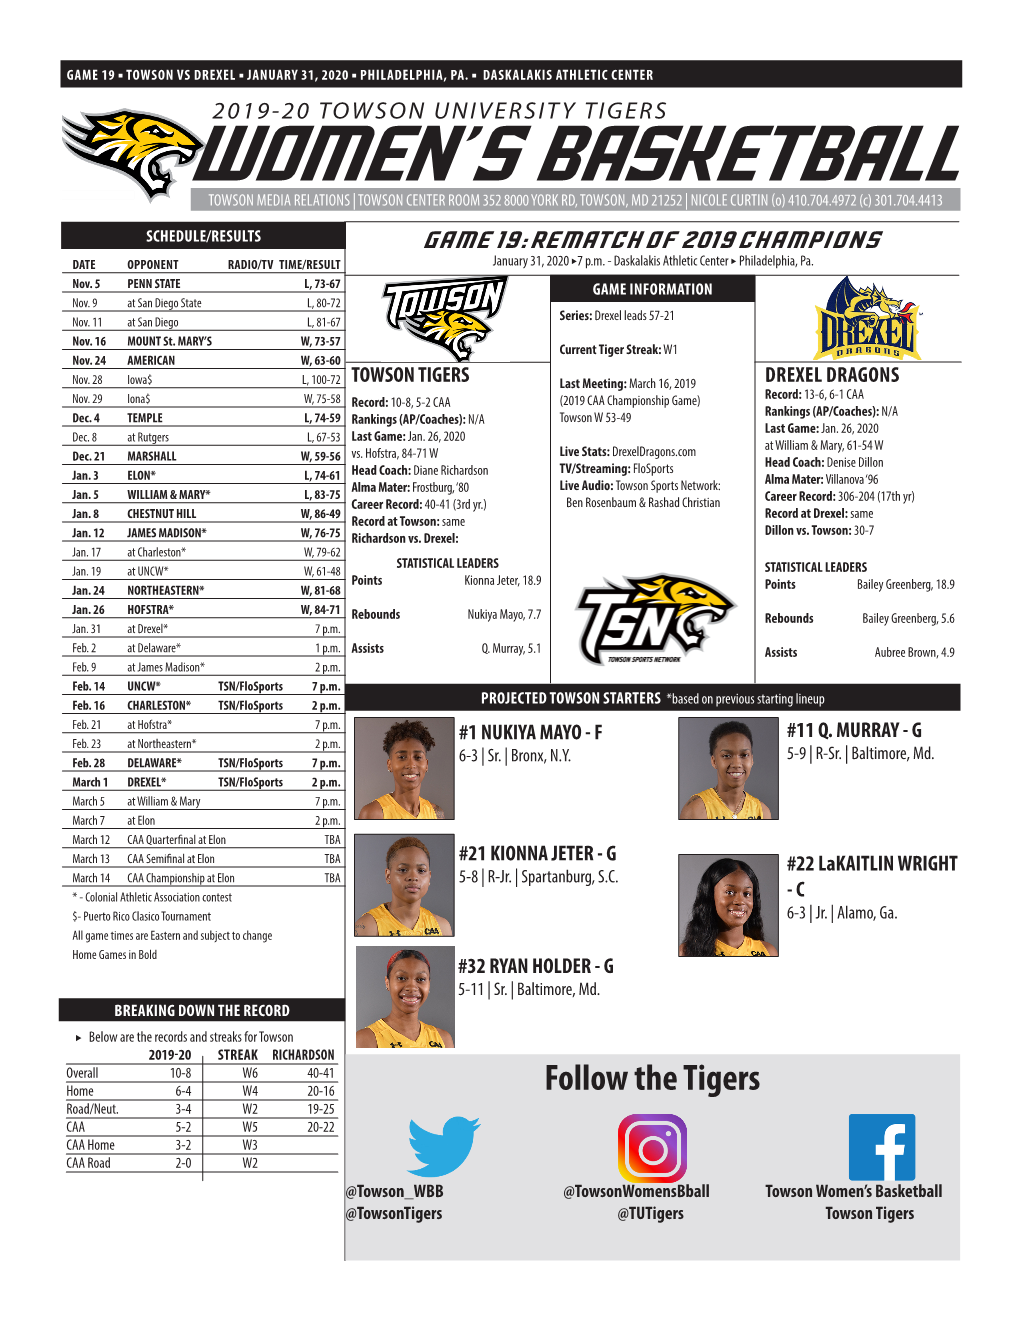 Women's Basketball Page 1/1 Combined Team Statistics As of Jan 28, 2020 All Games